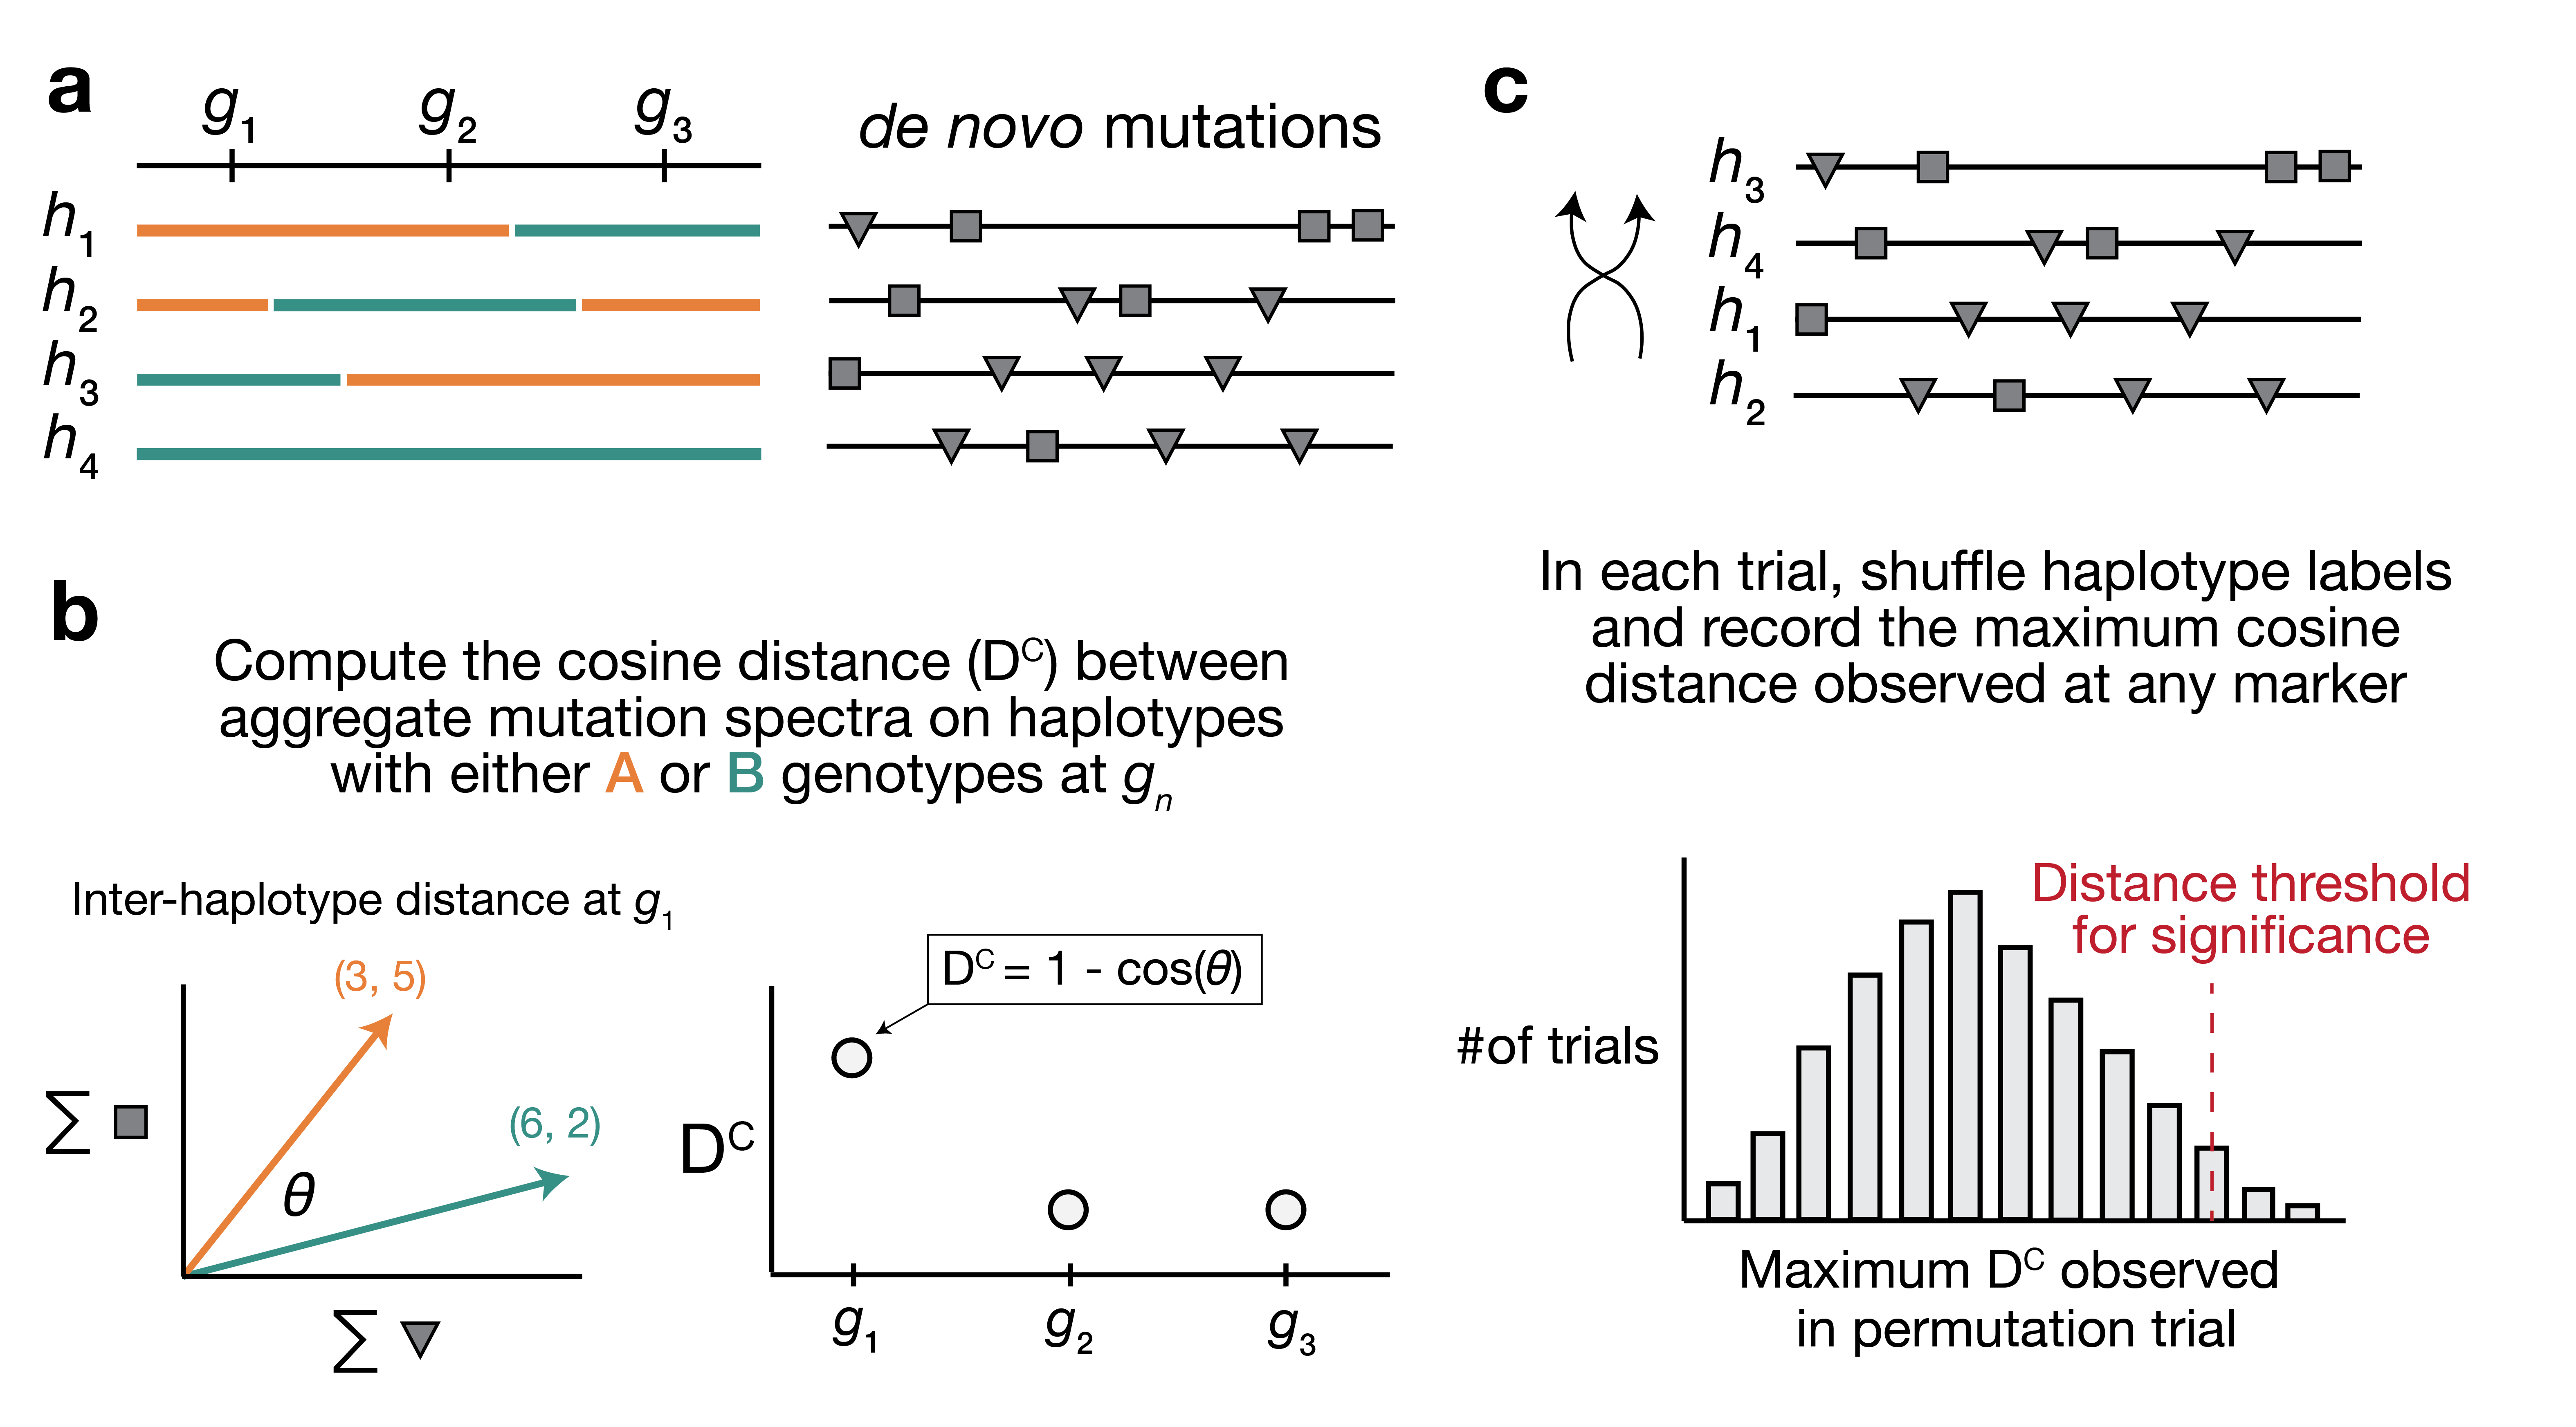 Figure 1: Overview of aggregate mutation spectrum distance method for discovering mutator alleles. a) A population of four haplotypes has been genotyped at three informative markers (g_1 through g_3); each haplotype also harbors unique de novo germline mutations. In practice, de novo mutations are partitioned by k-mer context; for simplicity in this toy example, de novo mutations are simply classified into two possible mutation types (grey squares represent C>(A/T/G) mutations, while grey triangles represent A>(C/T/G) mutations). b) At each informative marker g_n, we calculate the total number of each mutation type observed on haplotypes that carry either parental allele (i.e., the aggregate mutation spectrum) using all genome-wide de novo mutations. For example, haplotypes with A (orange) genotypes at g_1 carry a total of three “triangle” mutations and five “square” mutations, and haplotypes with B (green) genotypes carry a total of six triangle and two square mutations. We then calculate the cosine distance between the two aggregate mutation spectra, which we call the “aggregate mutation spectrum distance.” Cosine distance can be defined as 1 - \cos(\theta), where \theta is the angle between two vectors; in this case, the two vectors are the two aggregate spectra. We repeat this process for every informative marker g_n. c) To assess the significance of any distance peaks in b), we perform permutation tests. In each of N permutations, we shuffle the haplotype labels associated with the de novo mutation data, run a genome-wide distance scan, and record the maximum cosine distance encountered at any locus in the scan. Finally, we calculate the 1 - p percentile of the distribution of those maximum distances to obtain a genome-wide cosine distance threshold at the specified value of p.